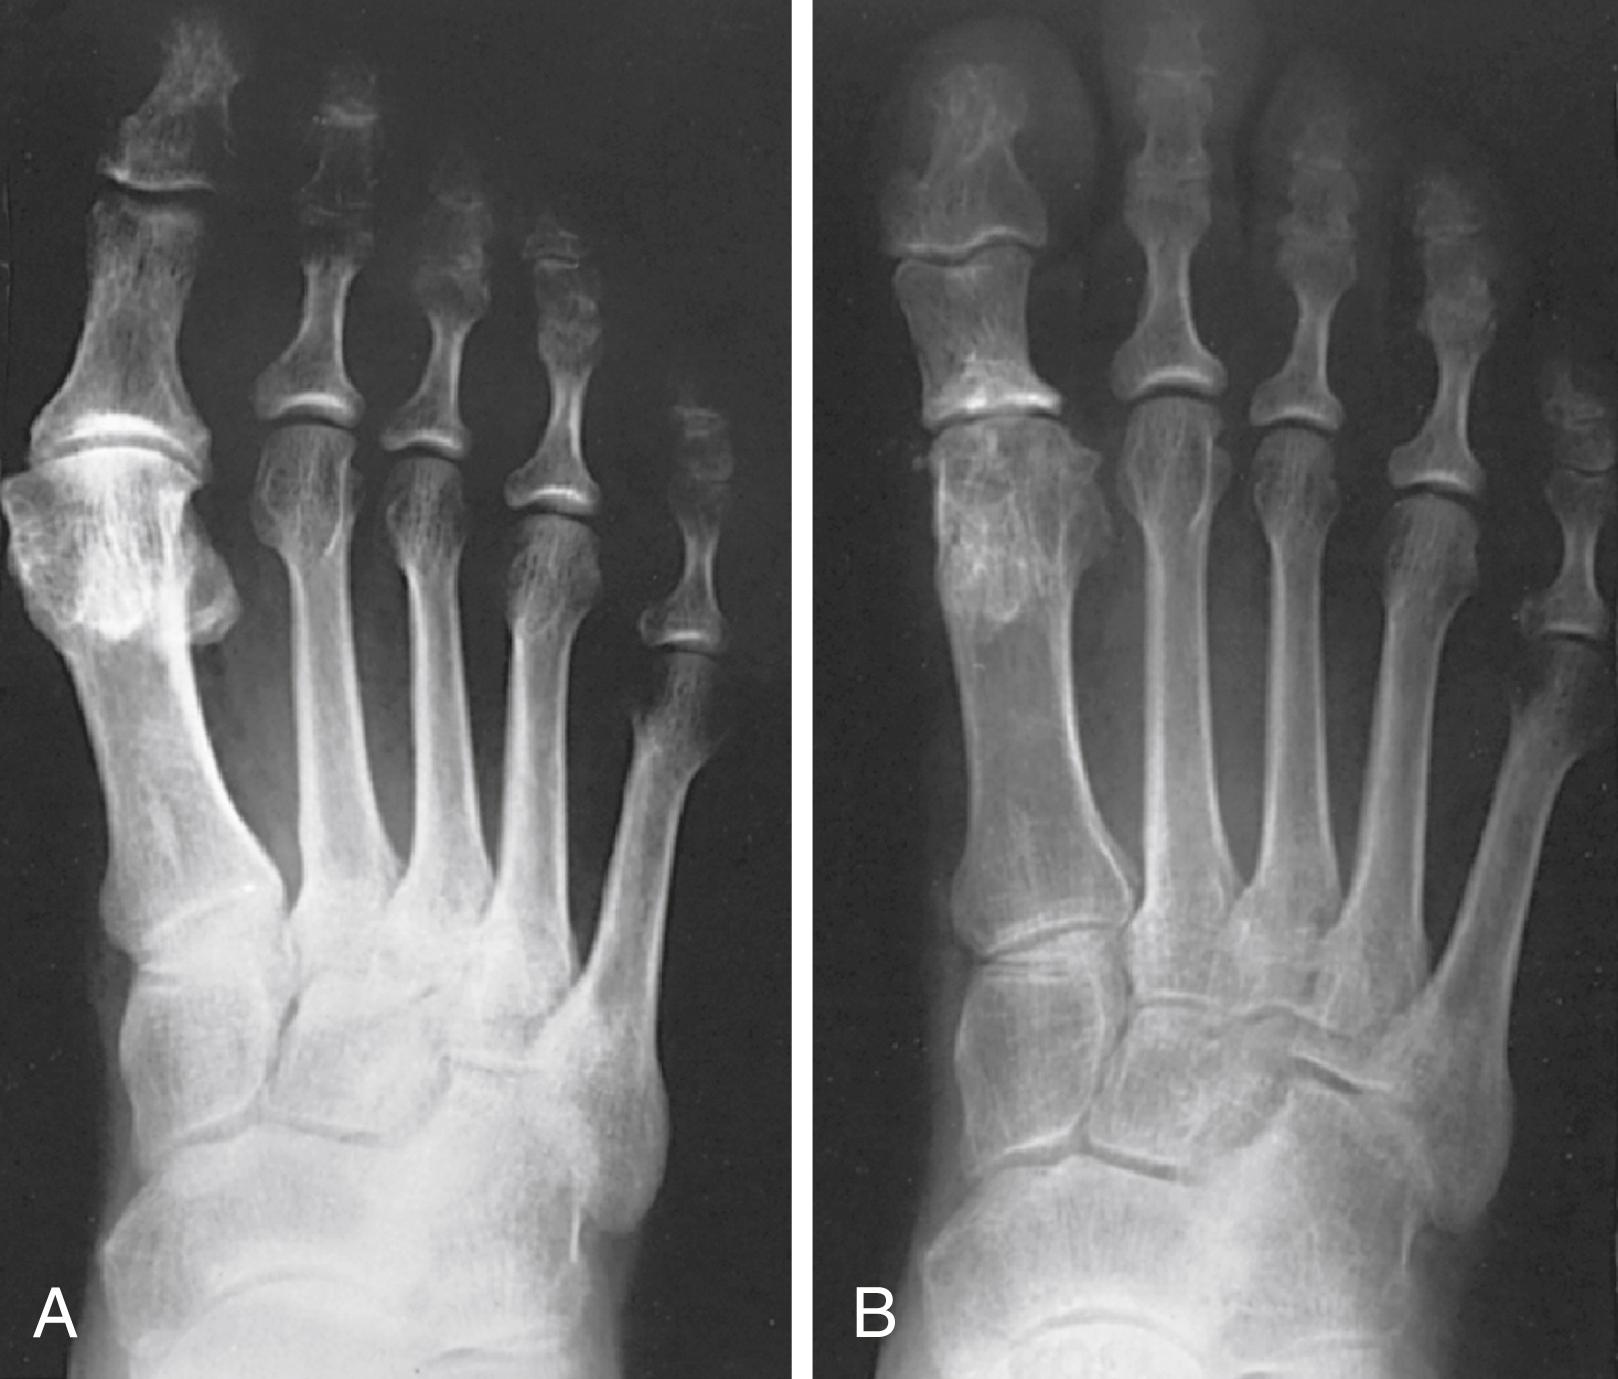 FIGURE 82.26, A, Anteroposterior radiograph of right foot of 65-year-old patient shows mild-to-moderate deformity and mild degenerative changes at first metatarsophalangeal joint; patient had intraarticular and periarticular symptoms. B, Twelve years after Keller procedure with excision of fibular sesamoid; note correction of first metatarsal varus and maintenance of enough joint space to allow functional range of motion.